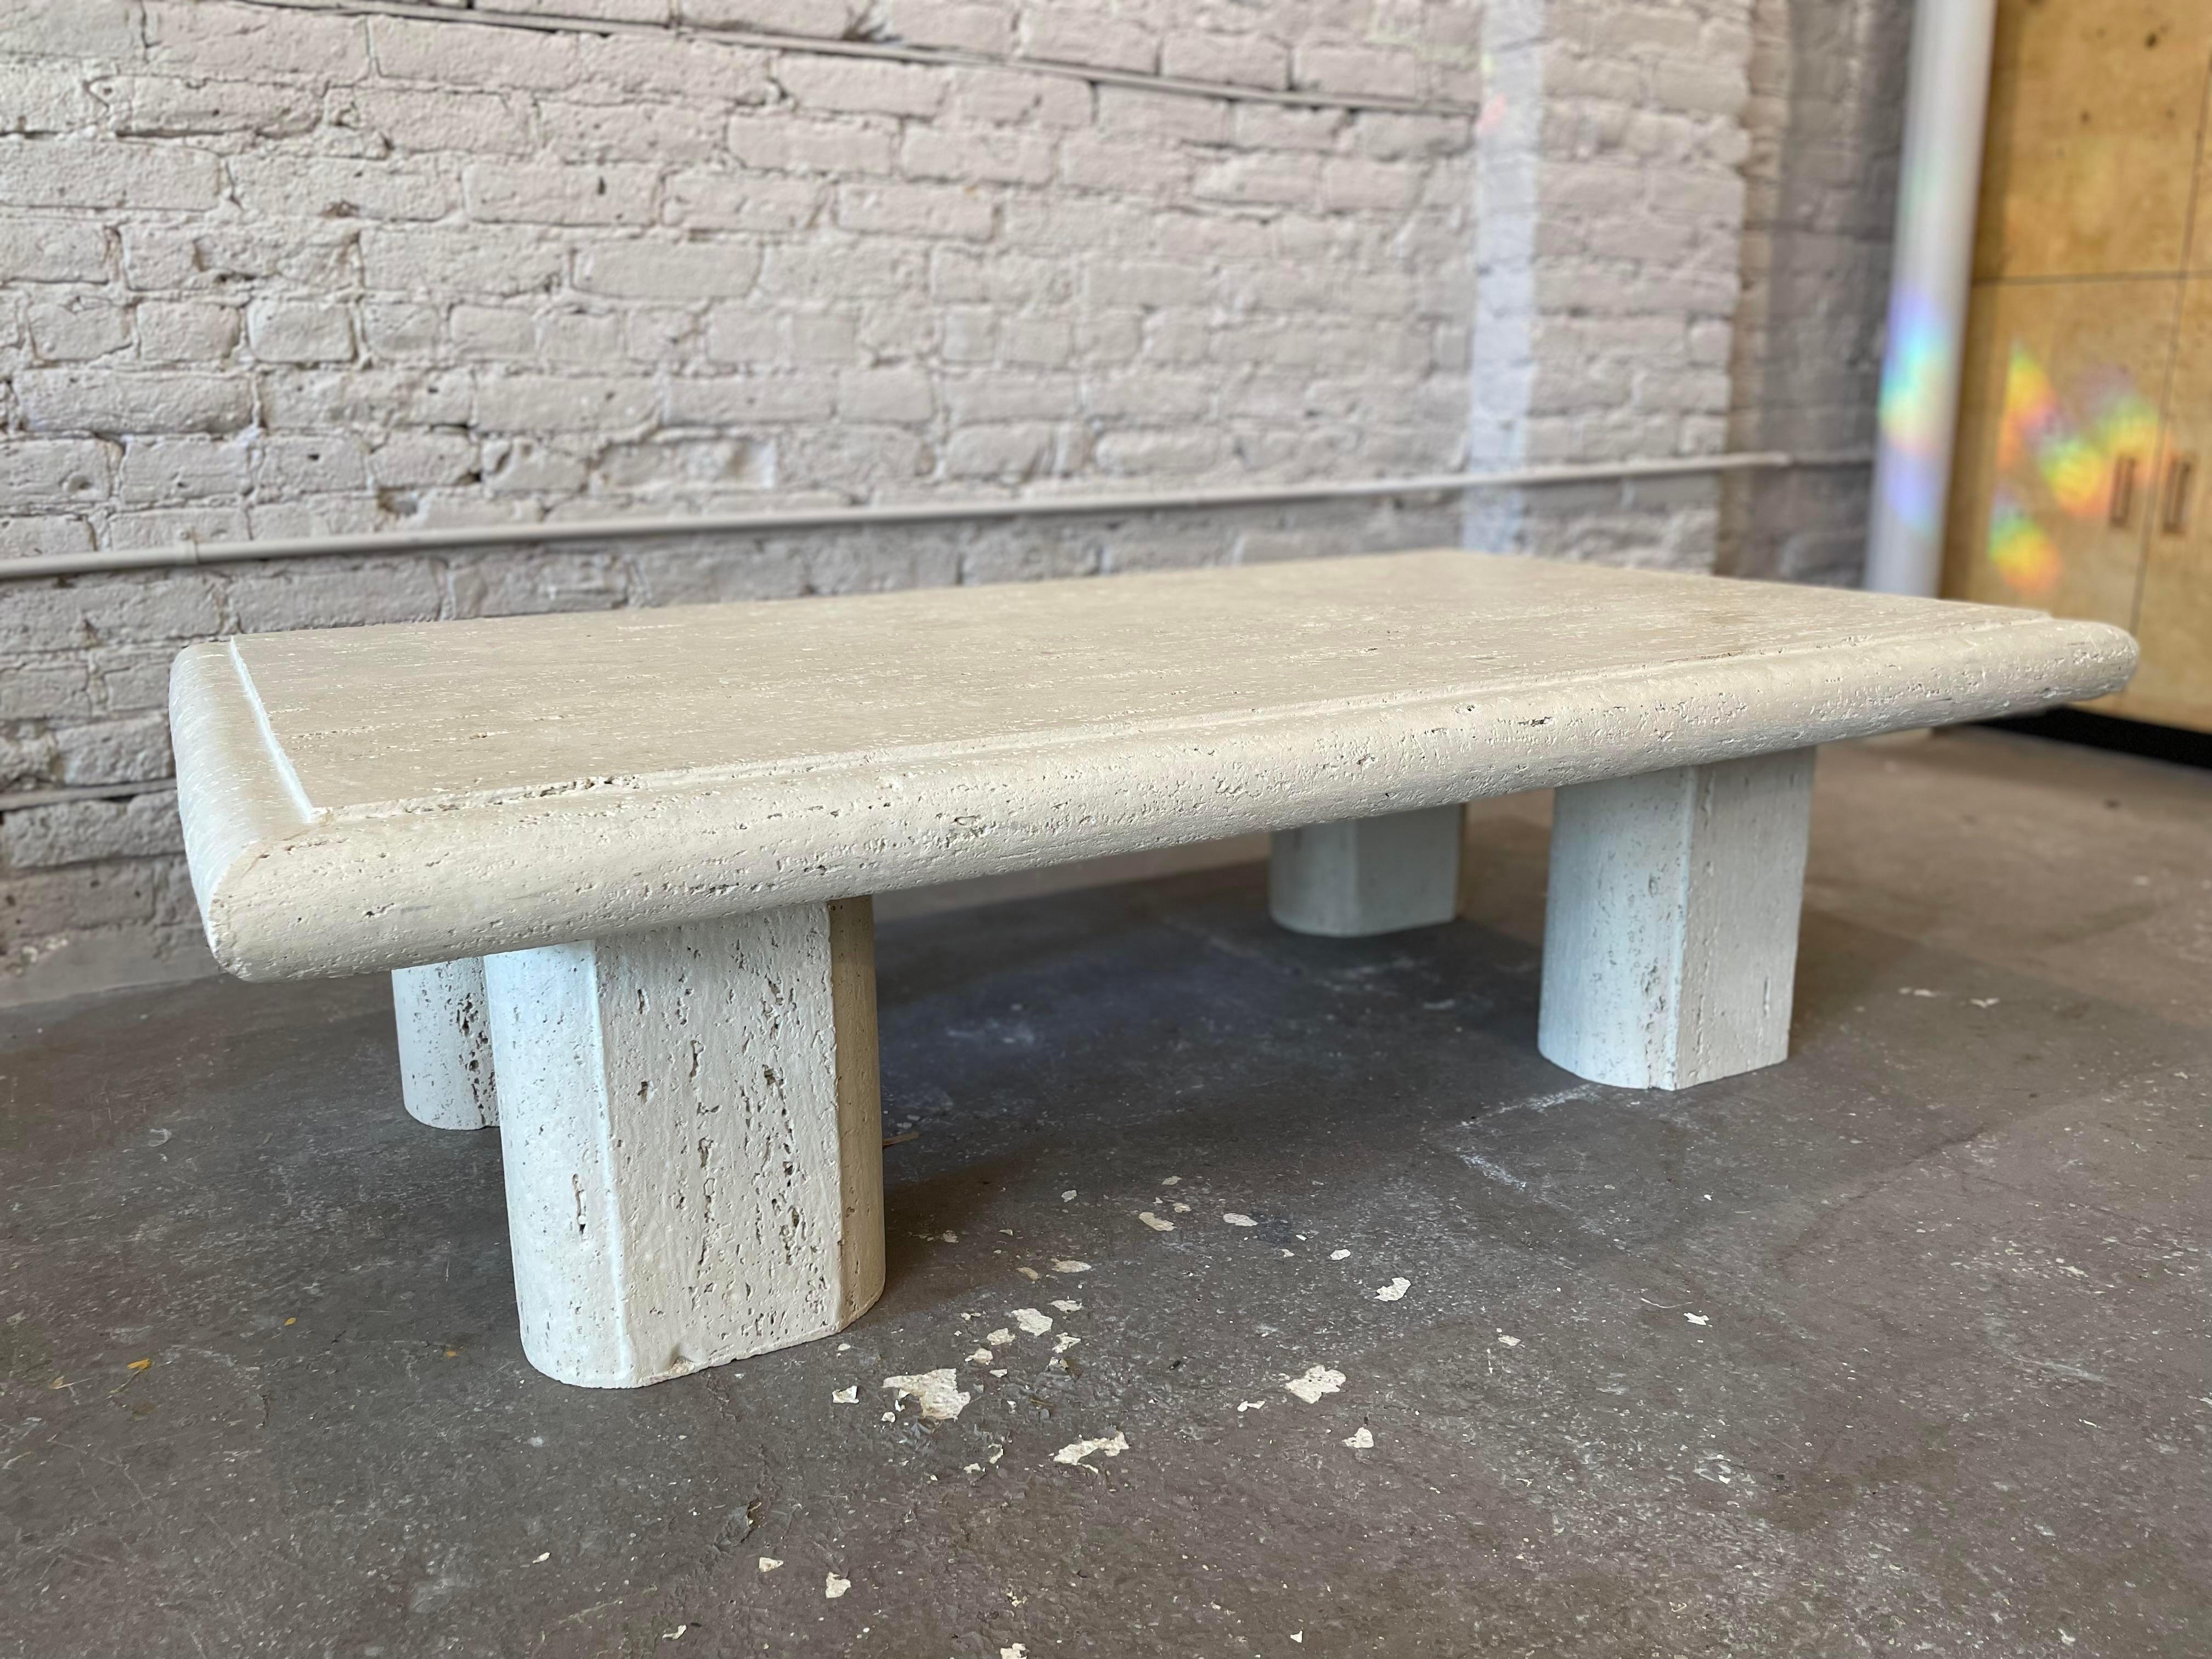 Lovely coffee unfilled travertine coffee table with 4 oval legs which fit into slots on the top for total securement.

The travertine has a beautiful patina that only comes with age.